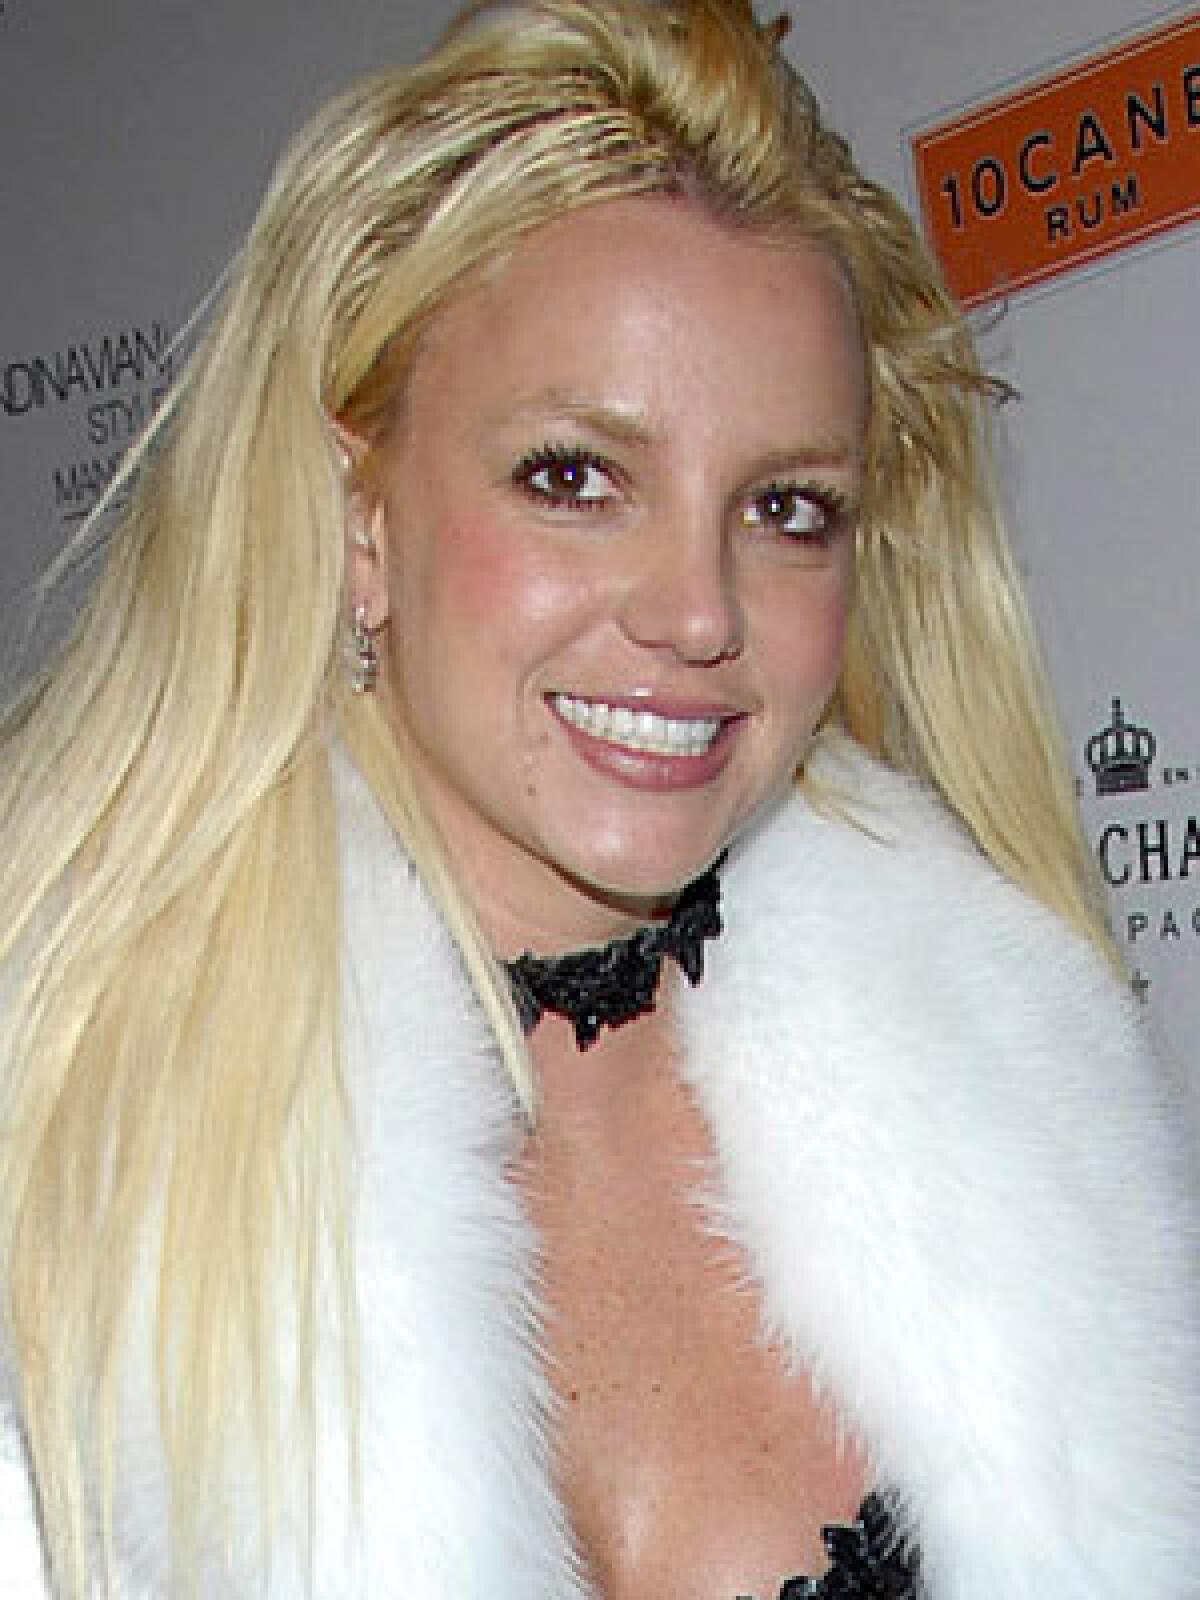 Spears, pictured here in 2007.